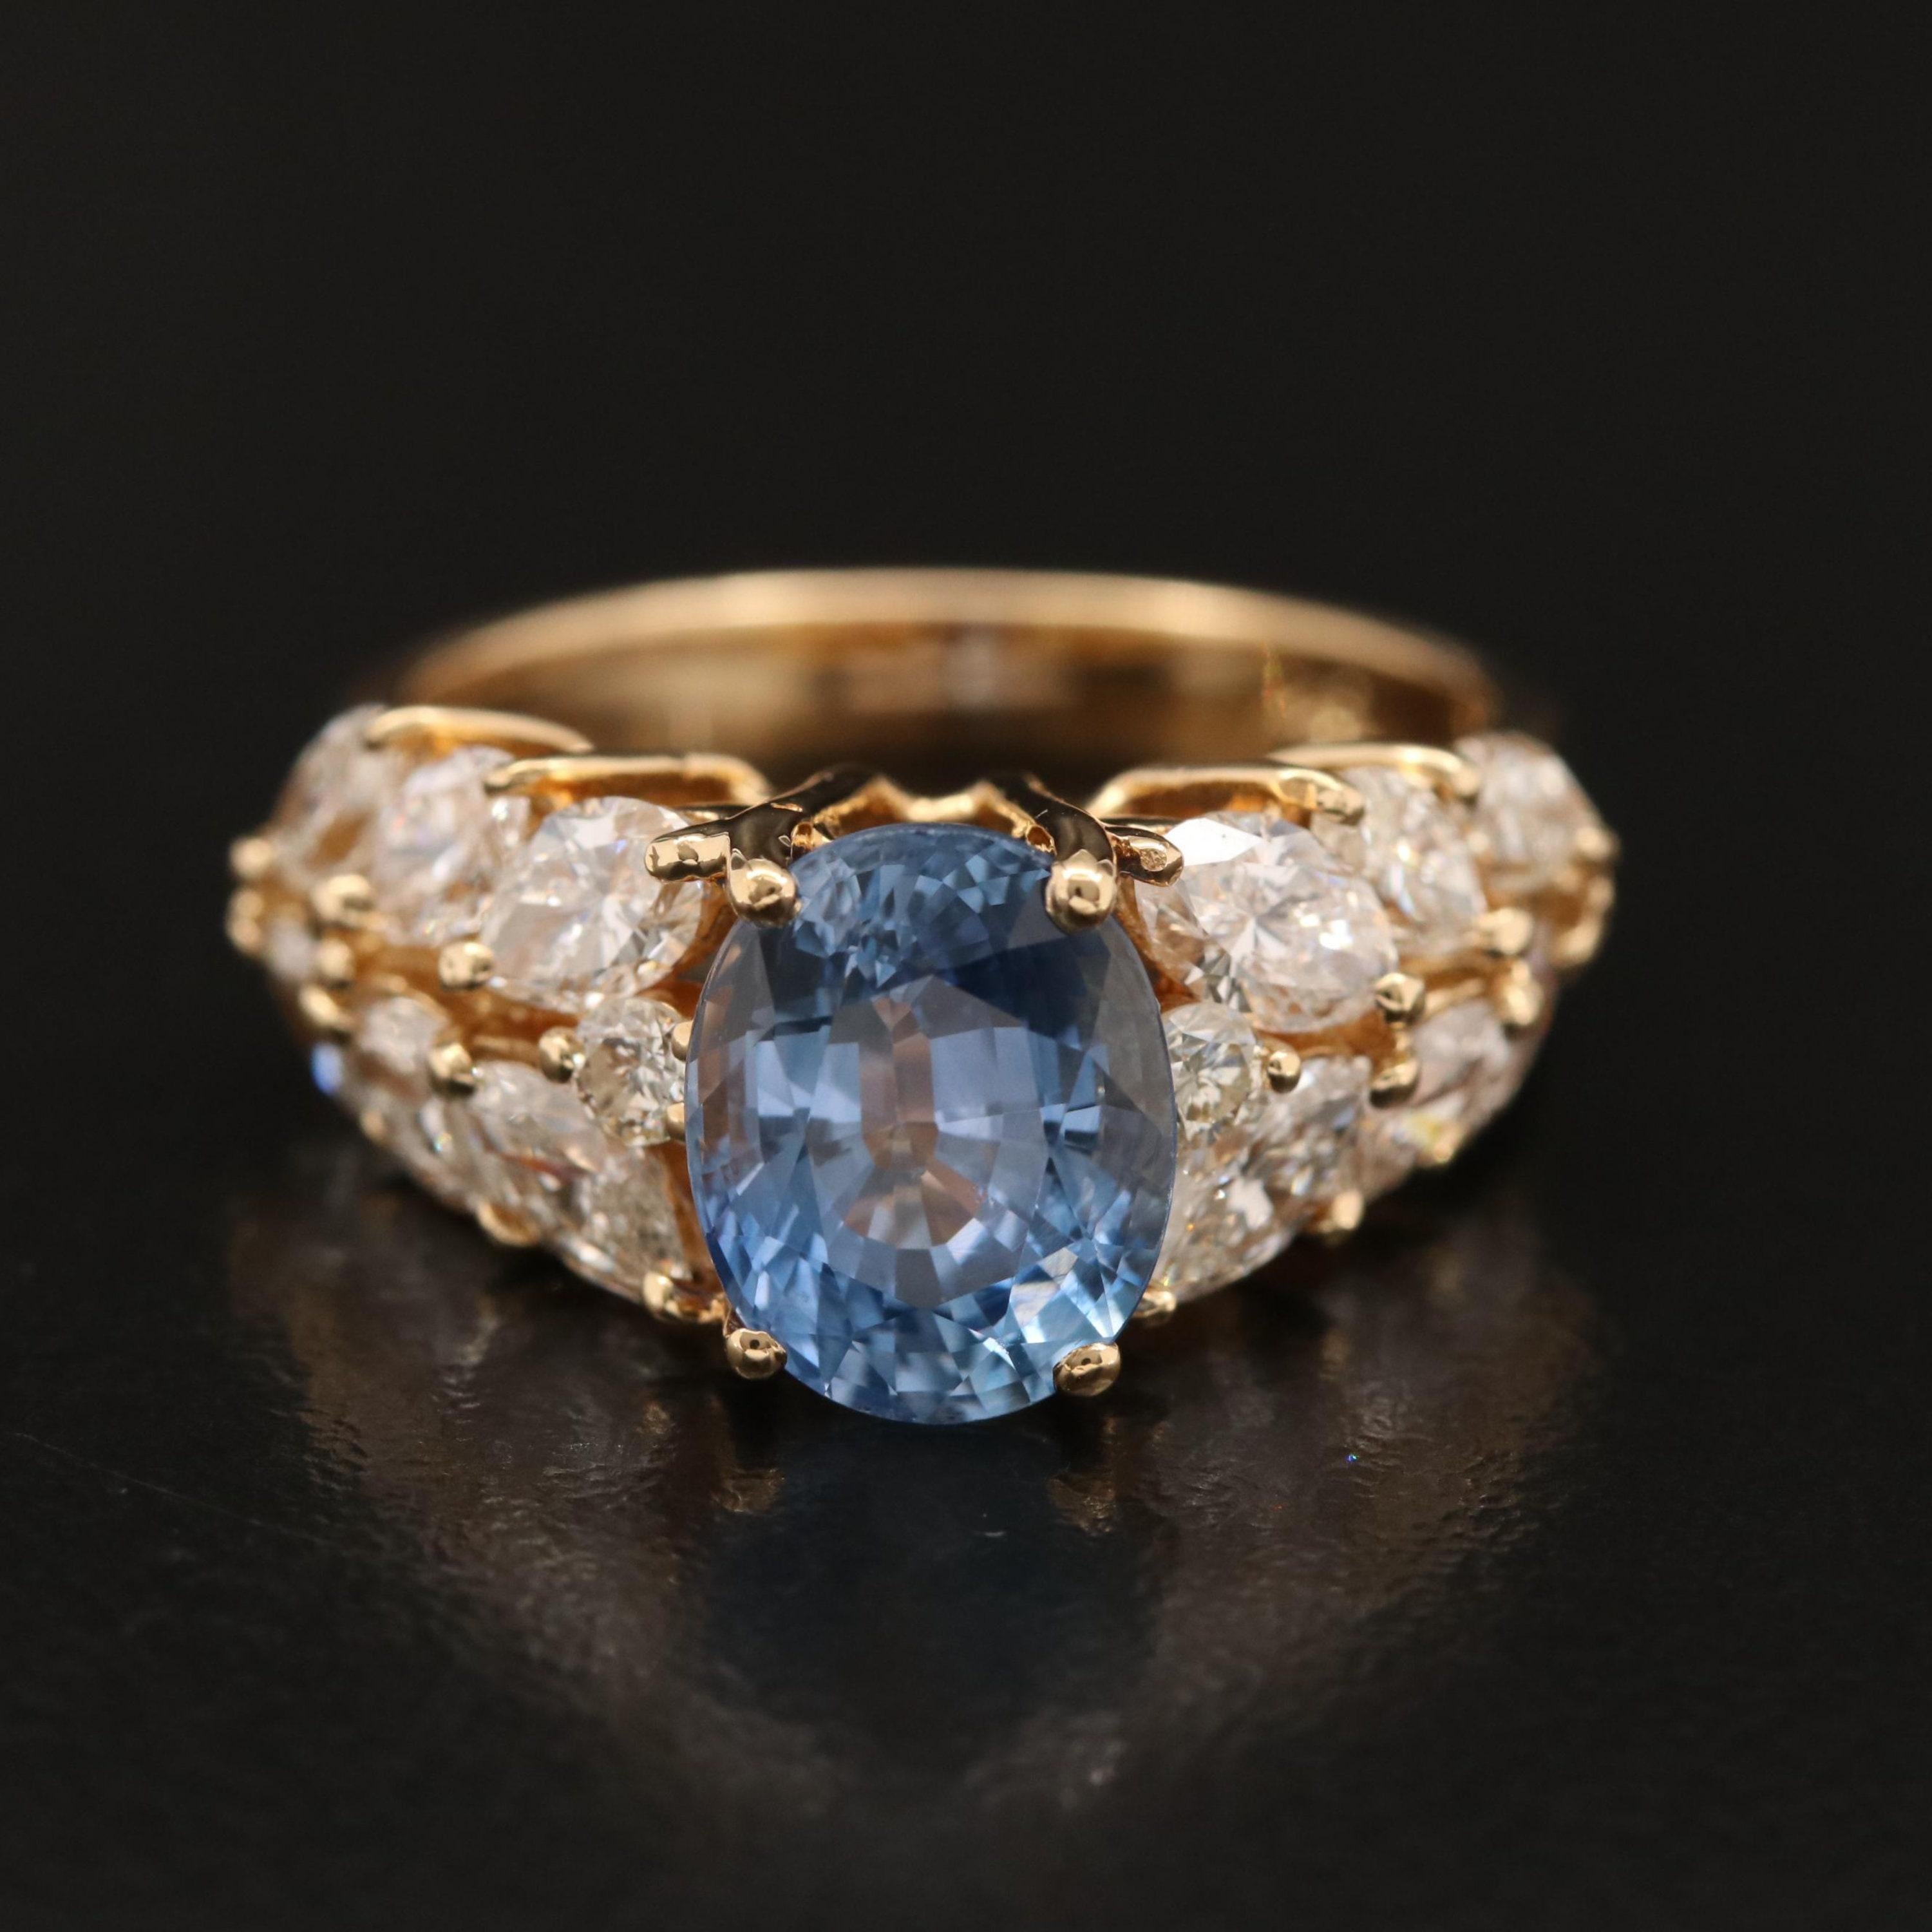 For Sale:  3 Carat Natural Sapphire Diamond Engagement Ring Set in 18K Gold, Cocktail Ring